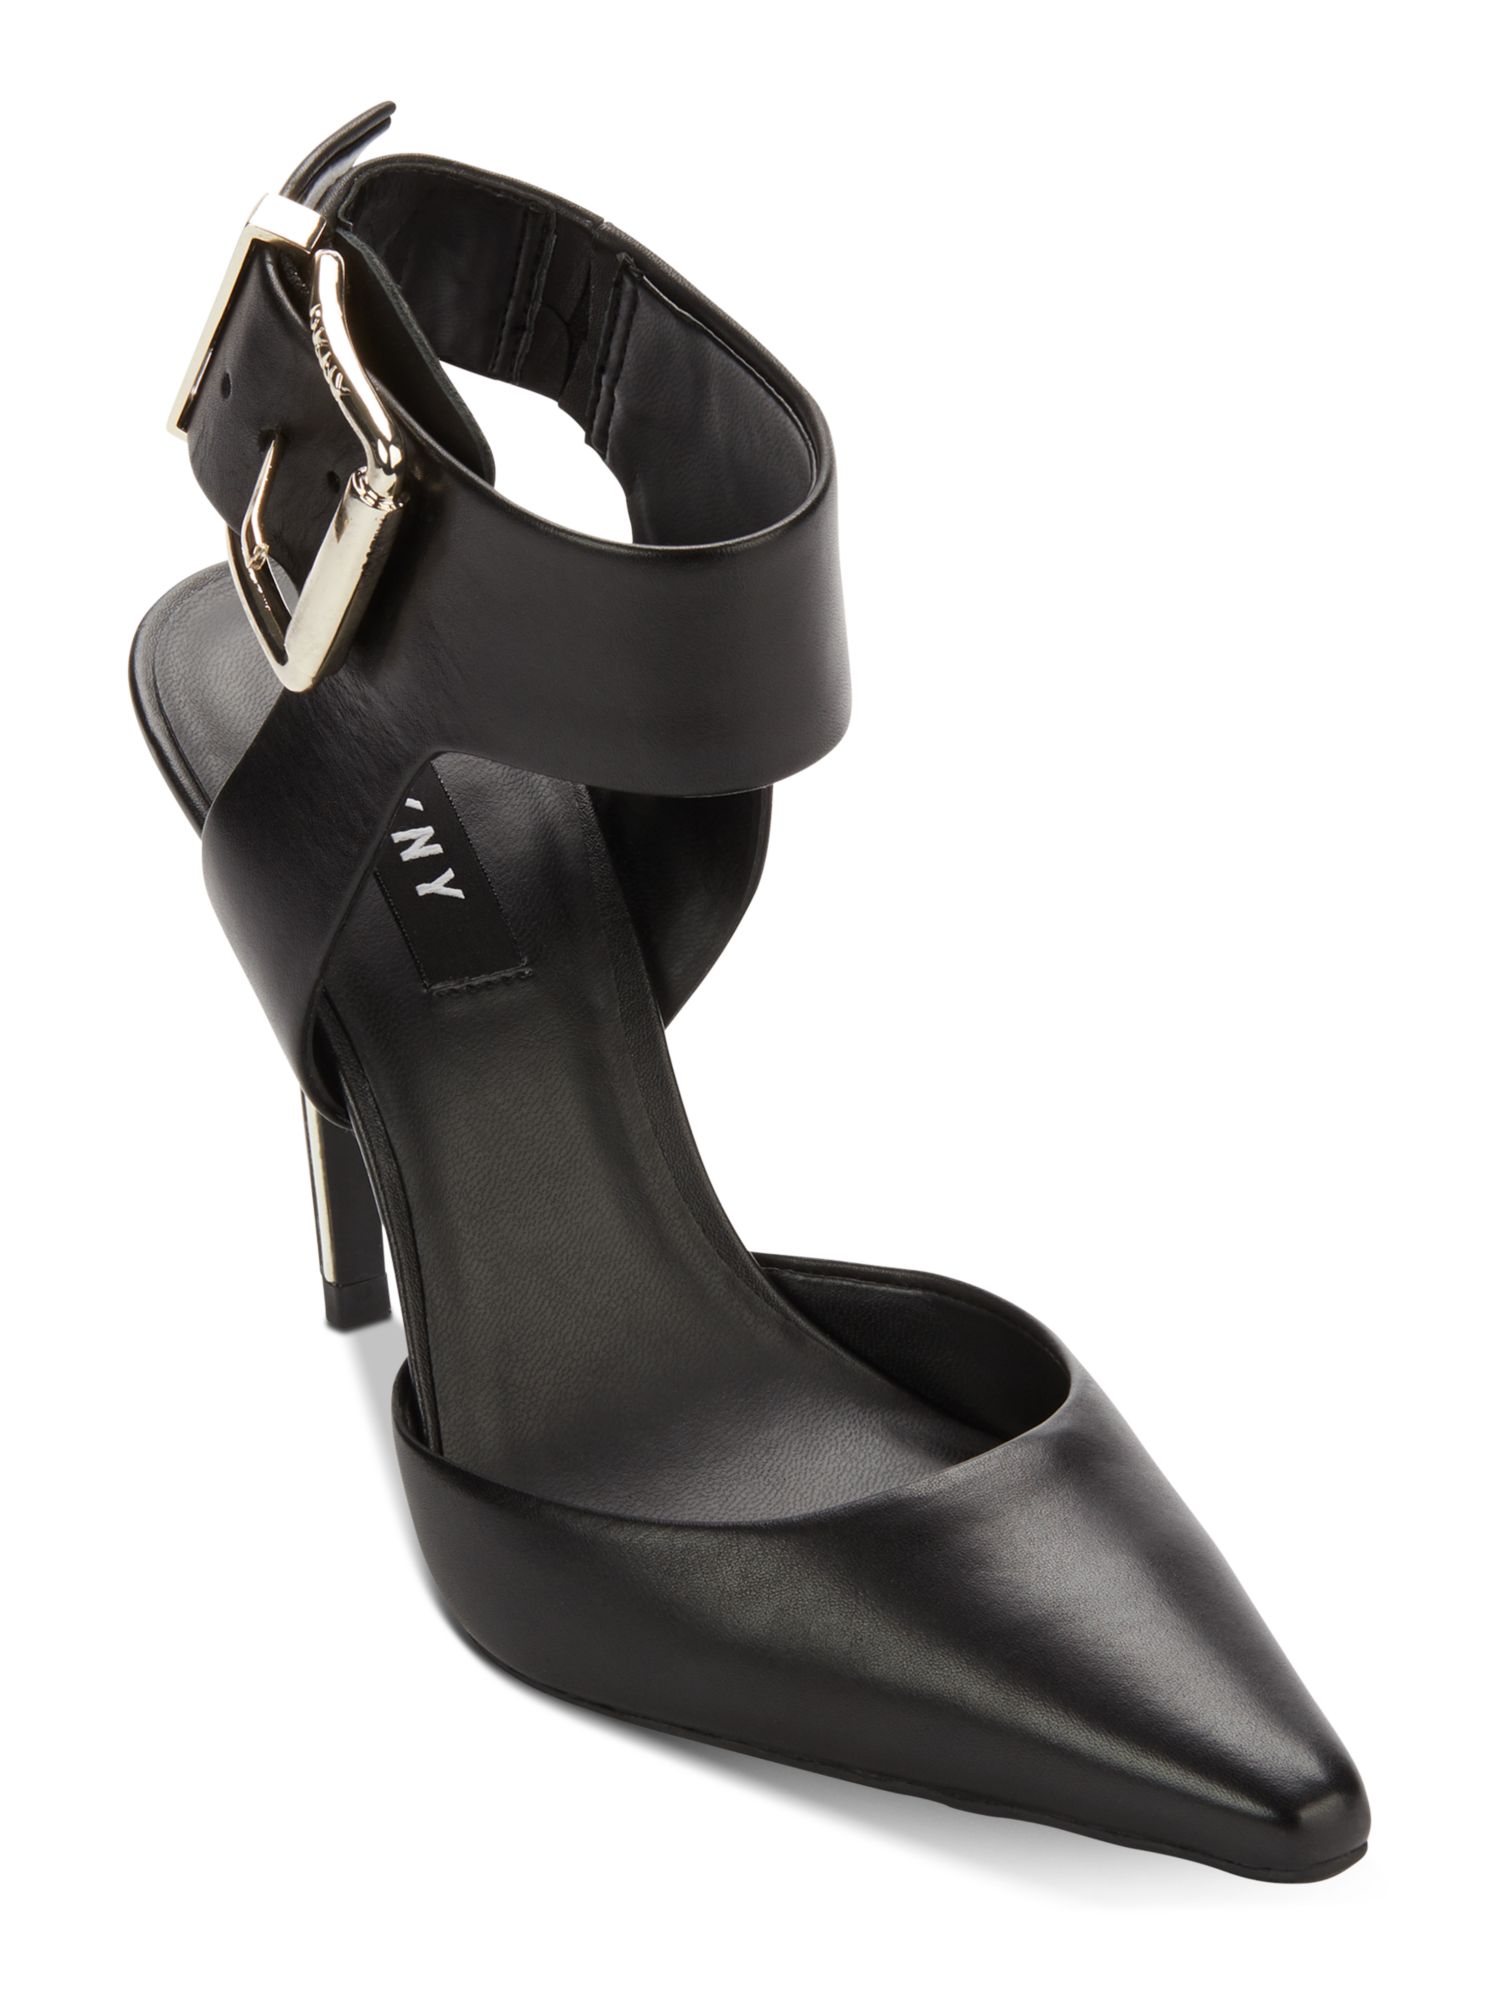 DKNY Womens Black Over-Sized Buckle Cushioned Ankle Strap Belka Pointed Toe Stacked Heel Buckle Leather Slingback 9.5